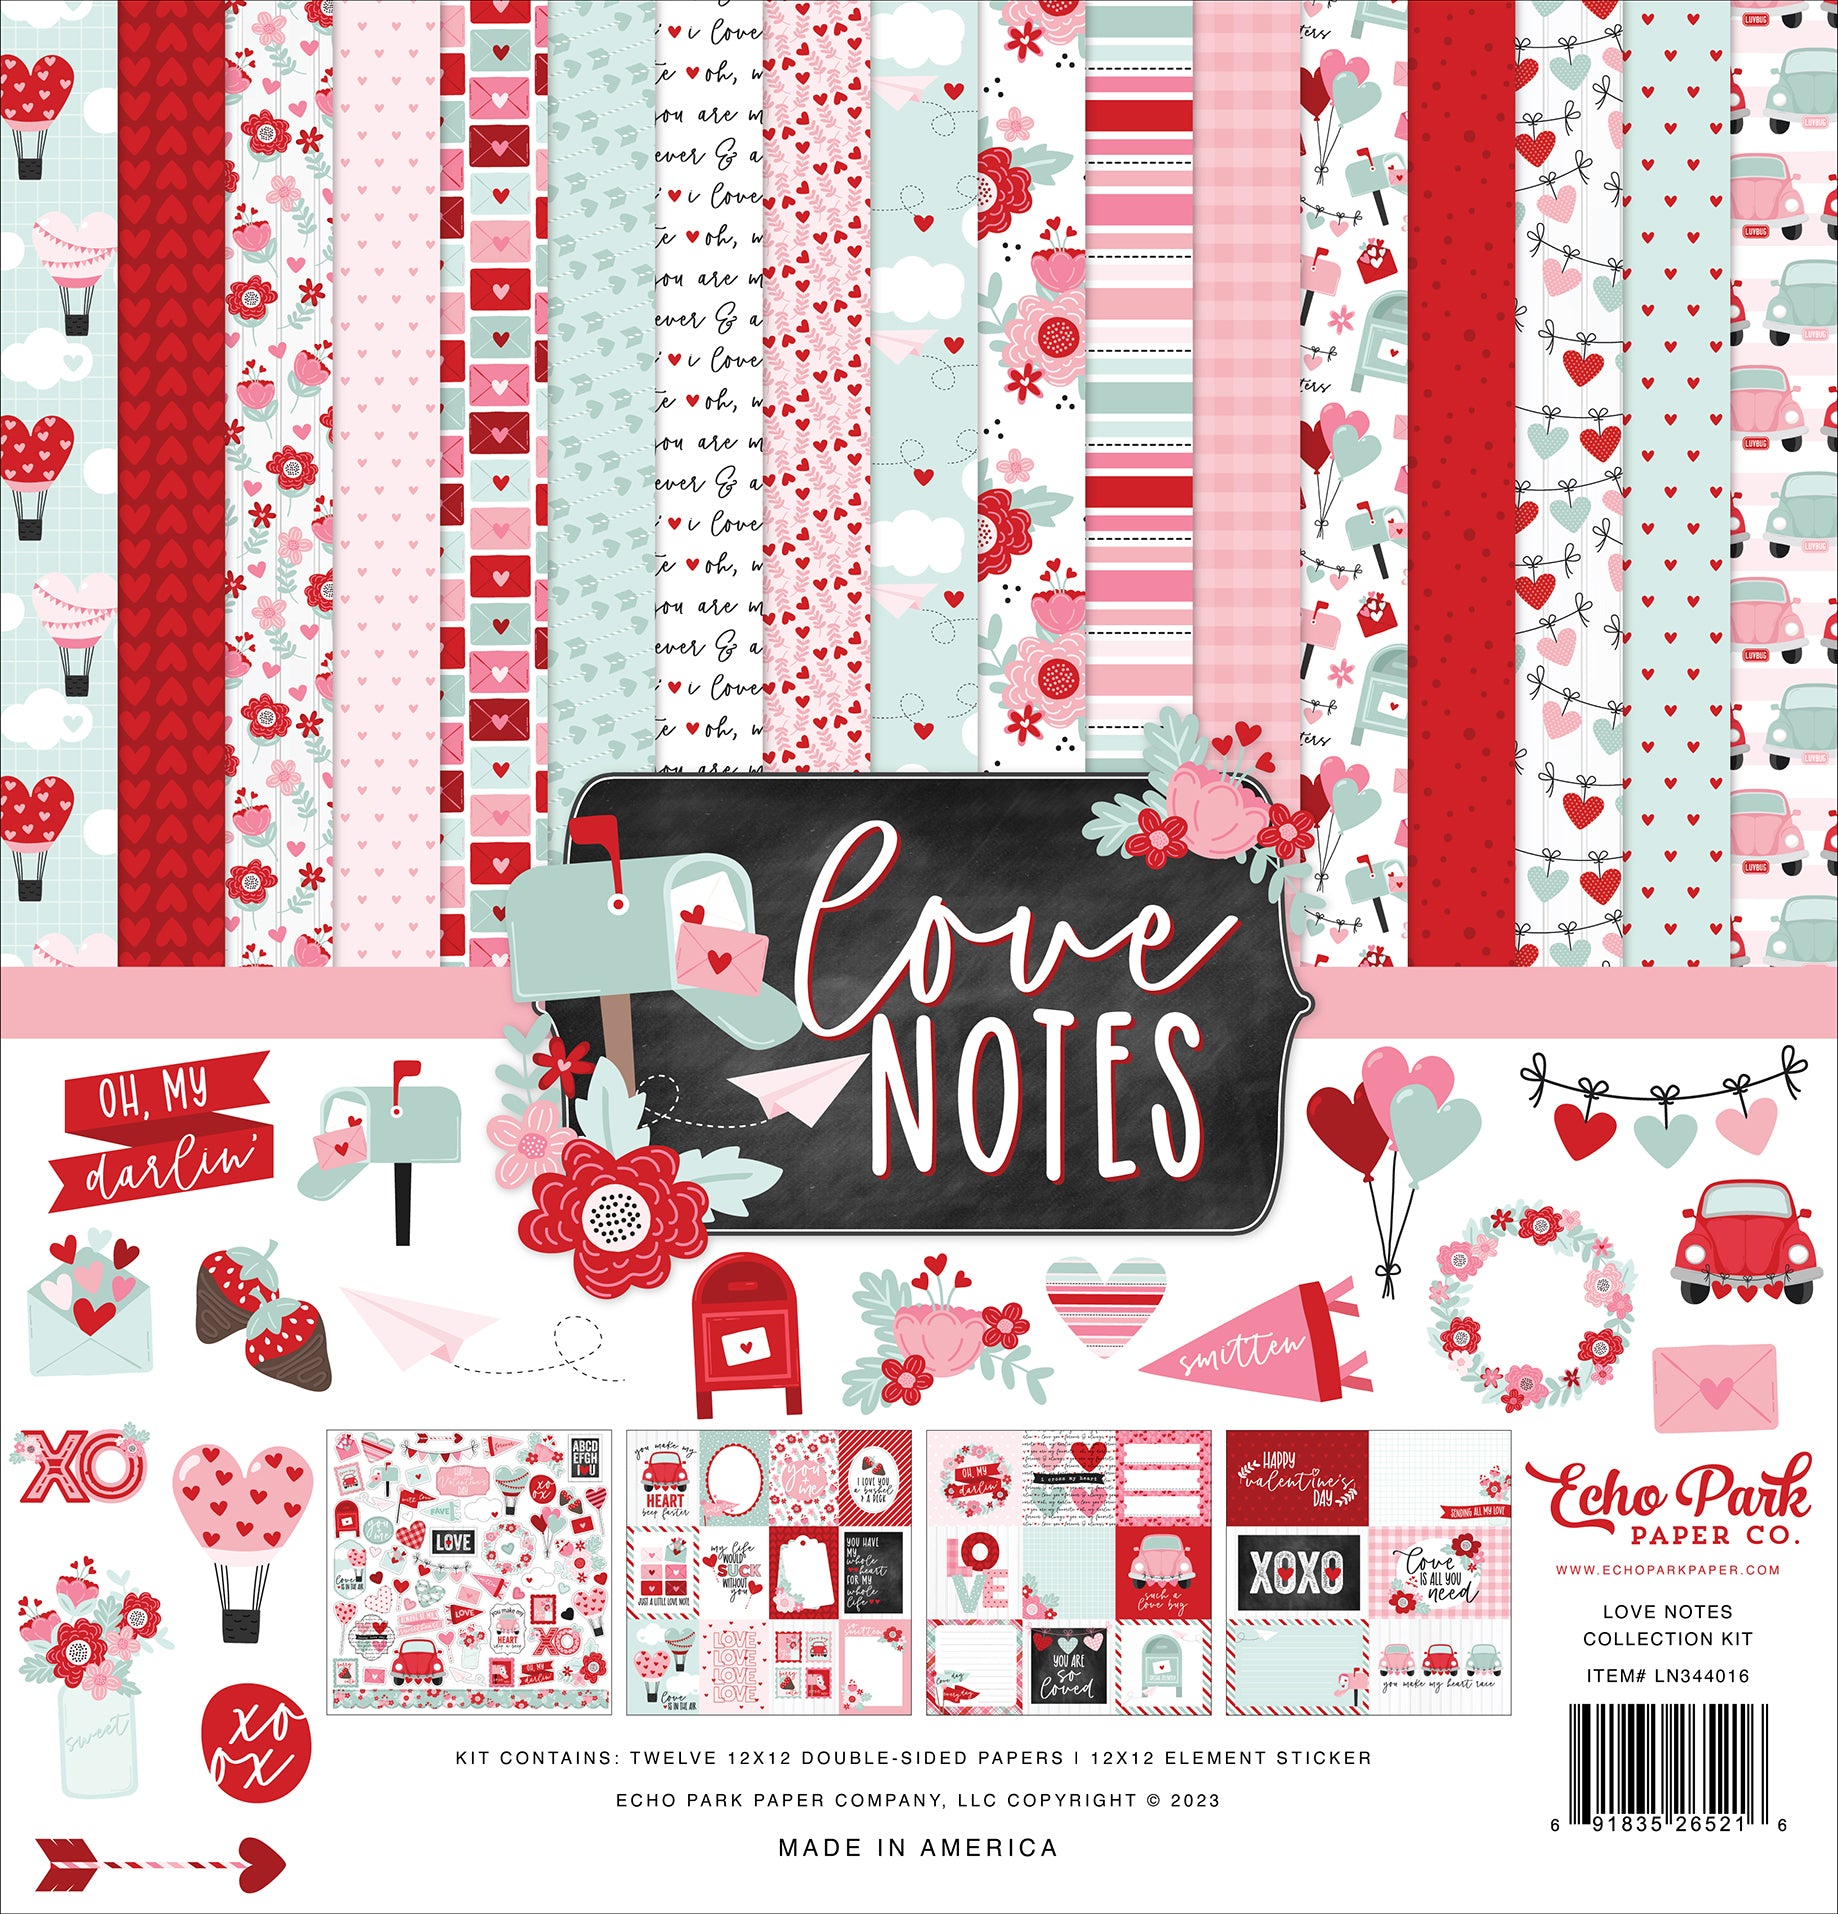 Love Notes Collection 12 x 12 Scrapbook Collection Kit by Echo Park Paper